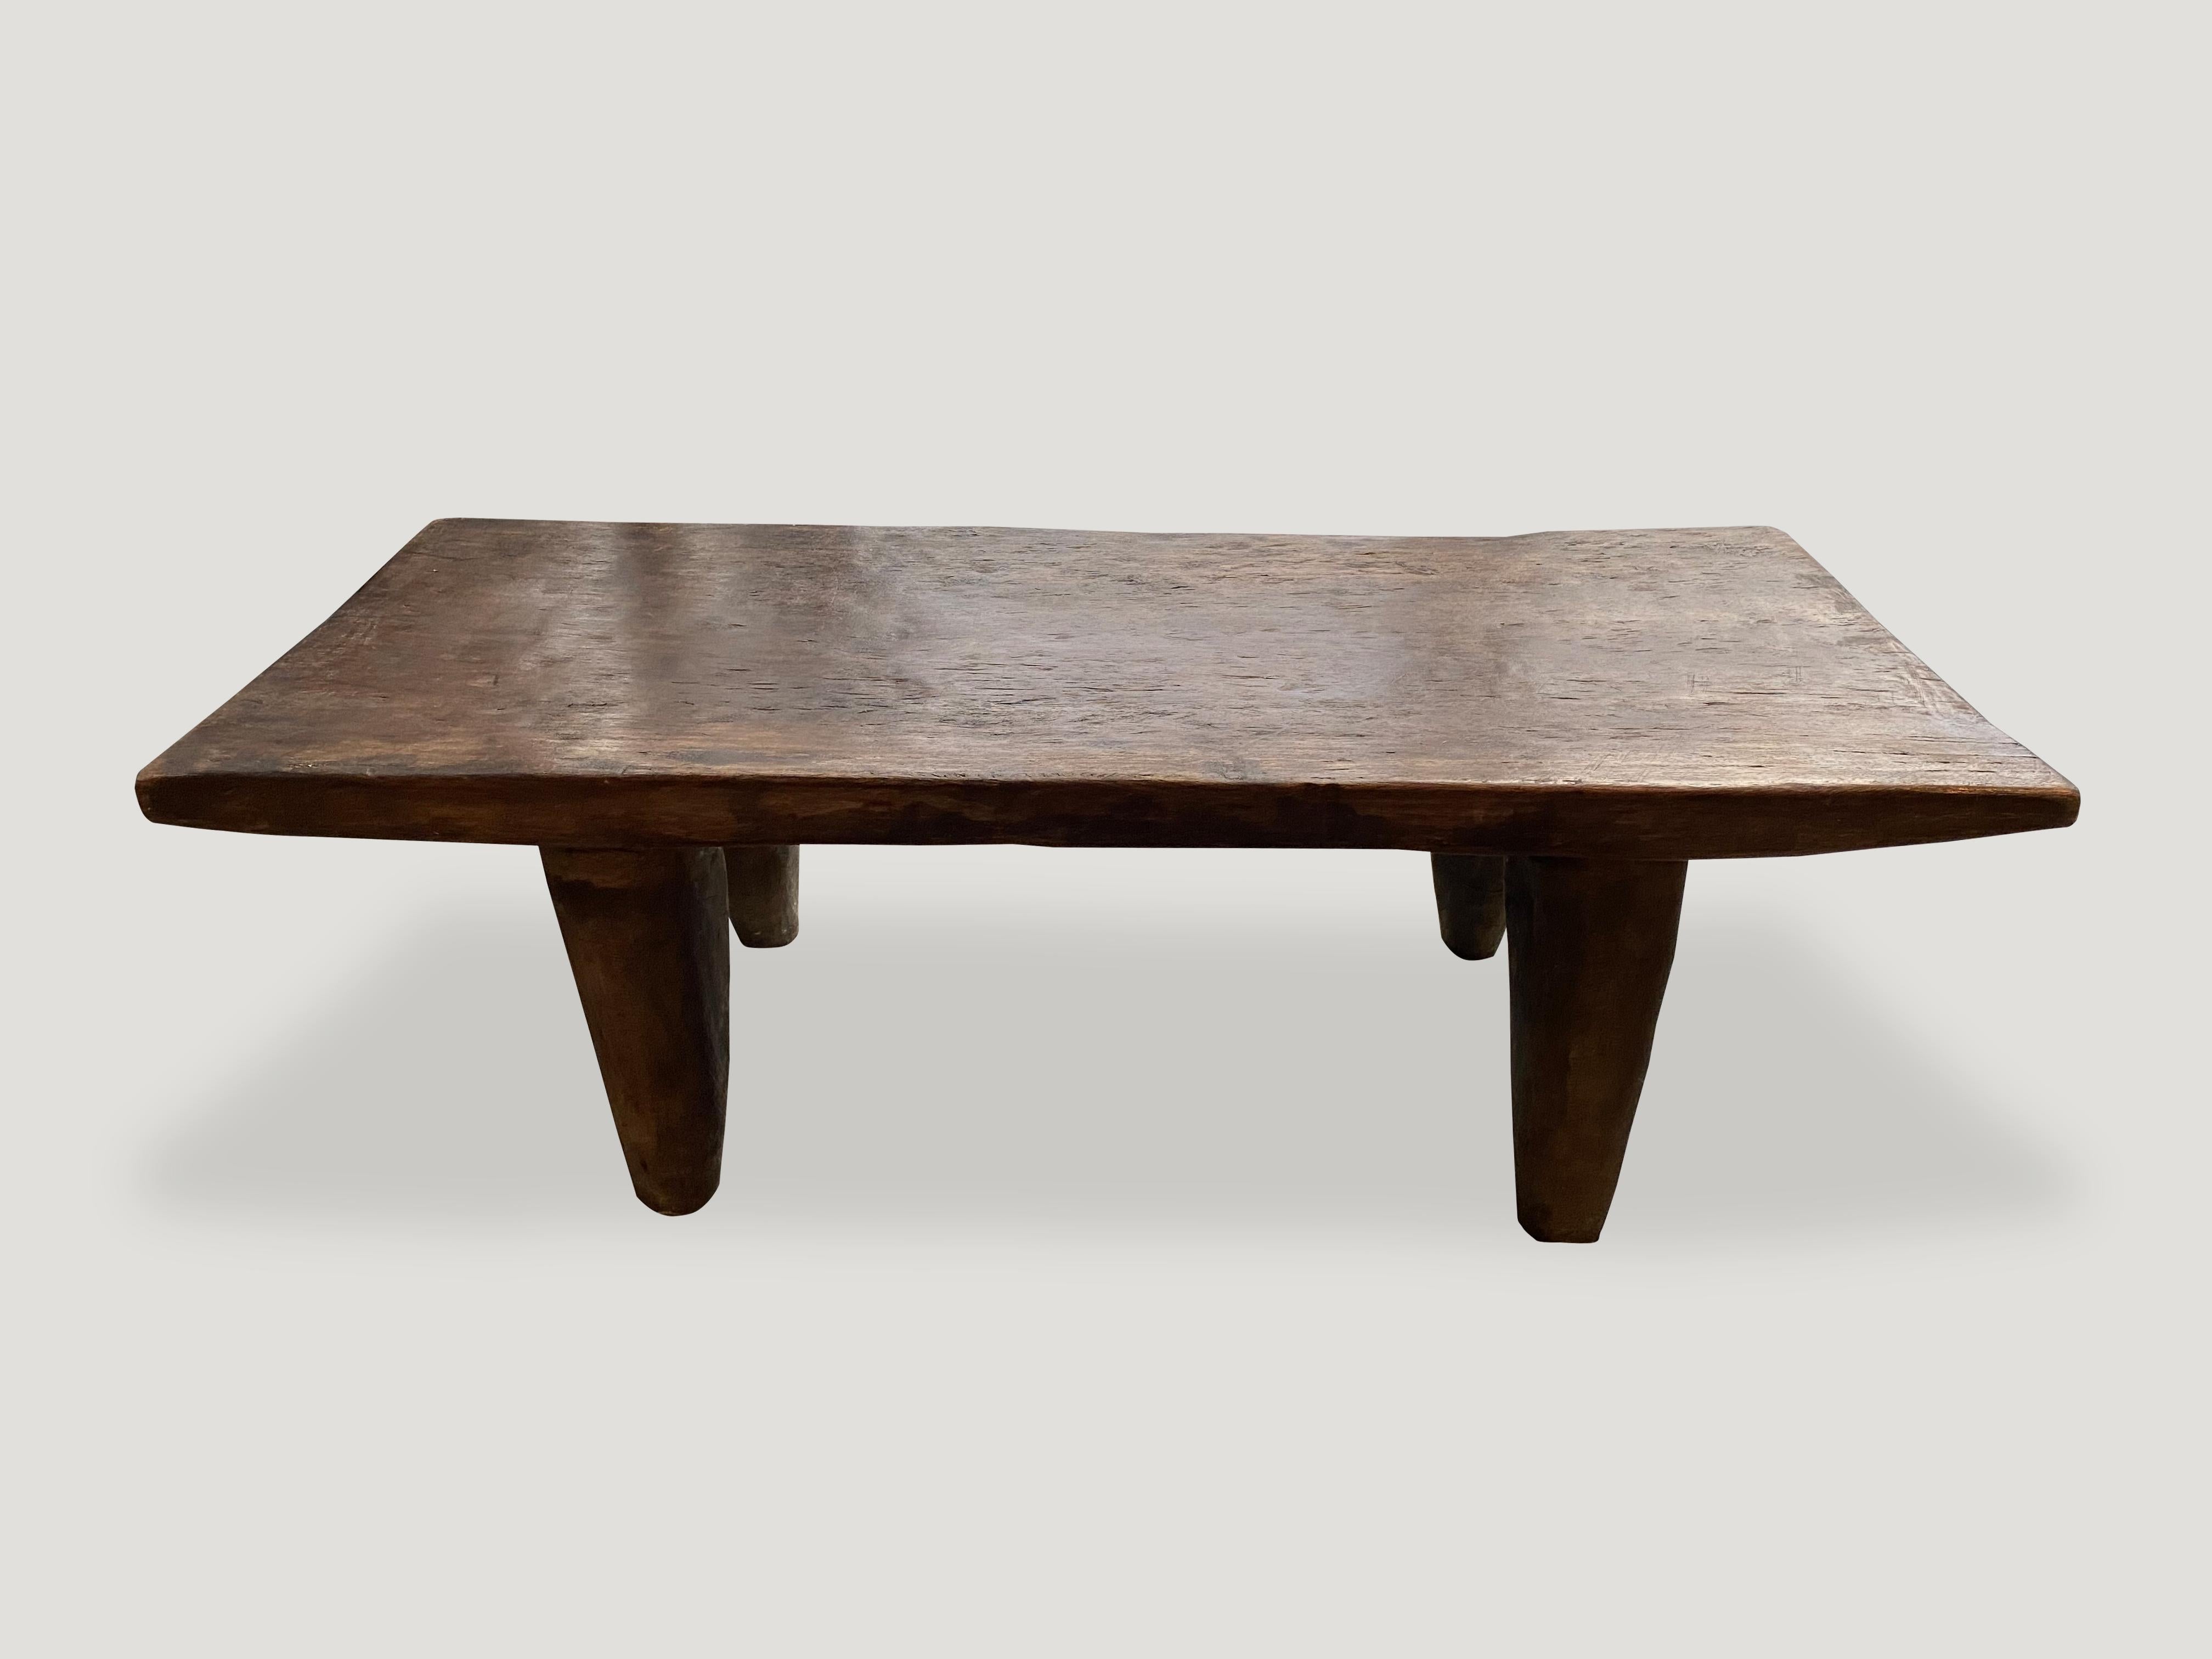 Tribal Iroko Wood Antique African Coffee Table or Bench